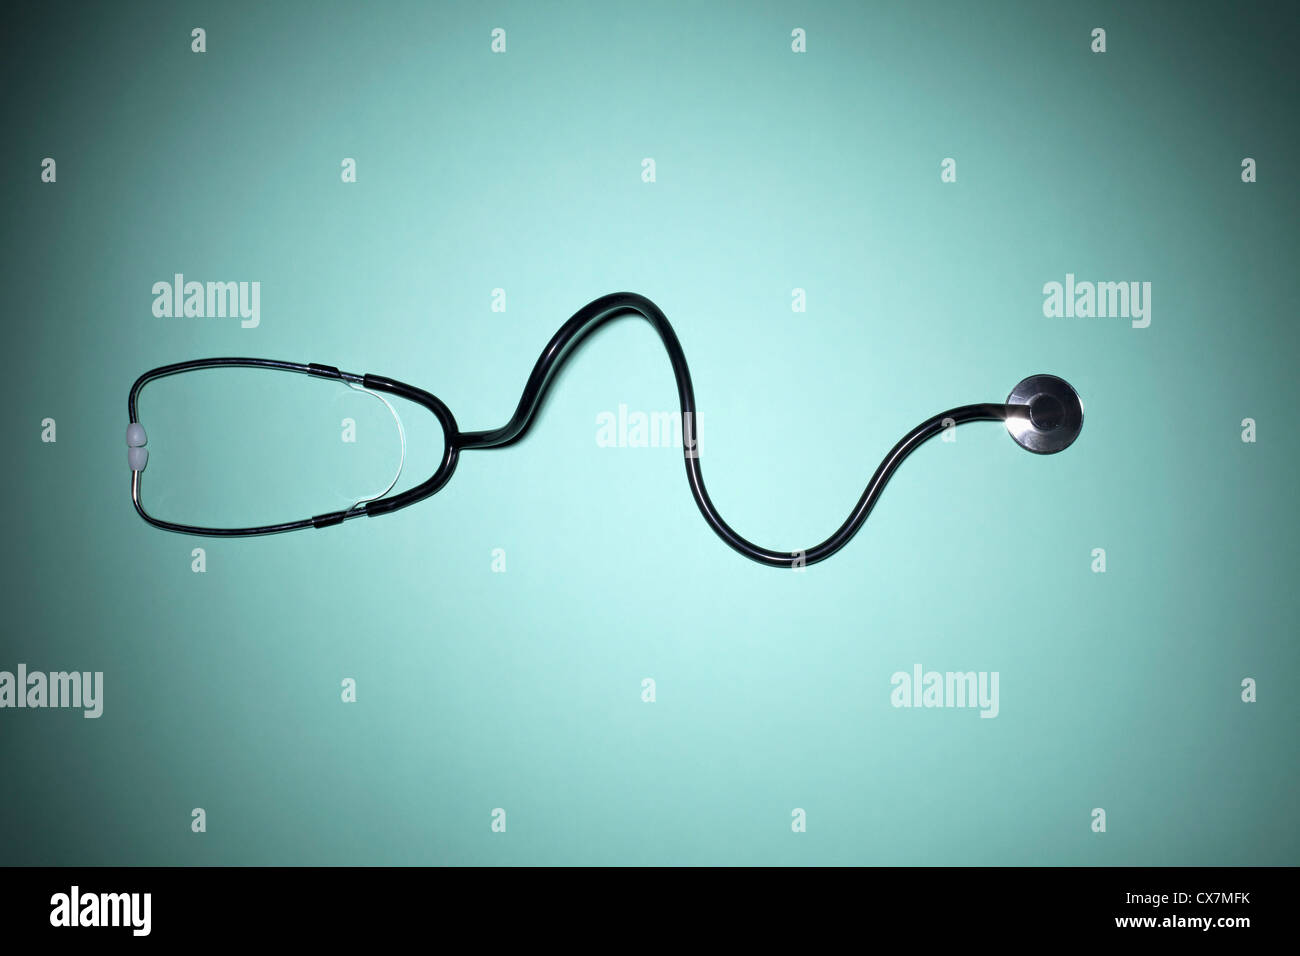 A stethoscope on a green background Stock Photo